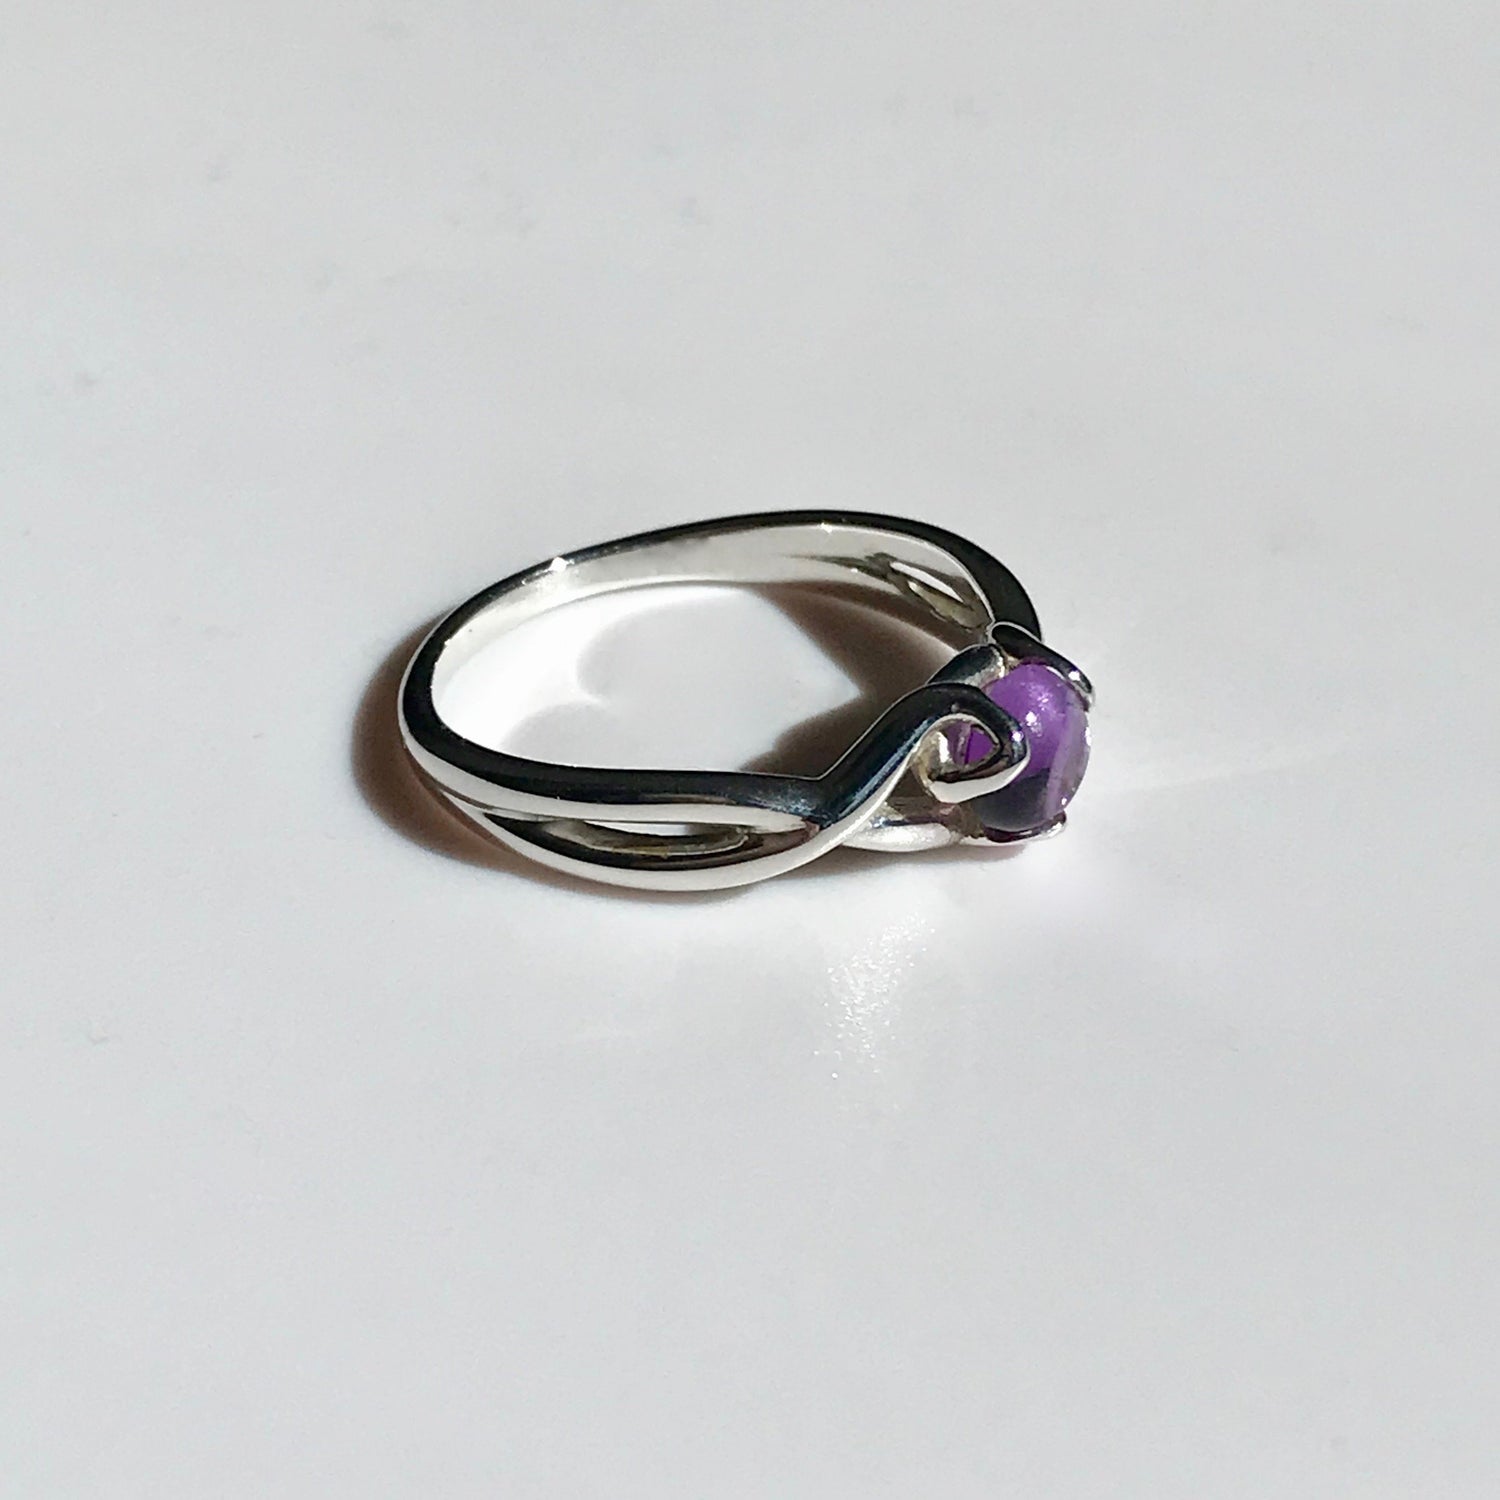 Amethyst Sterling Silver Ring with Gold Accents - Tropical Frogs | NOVICA